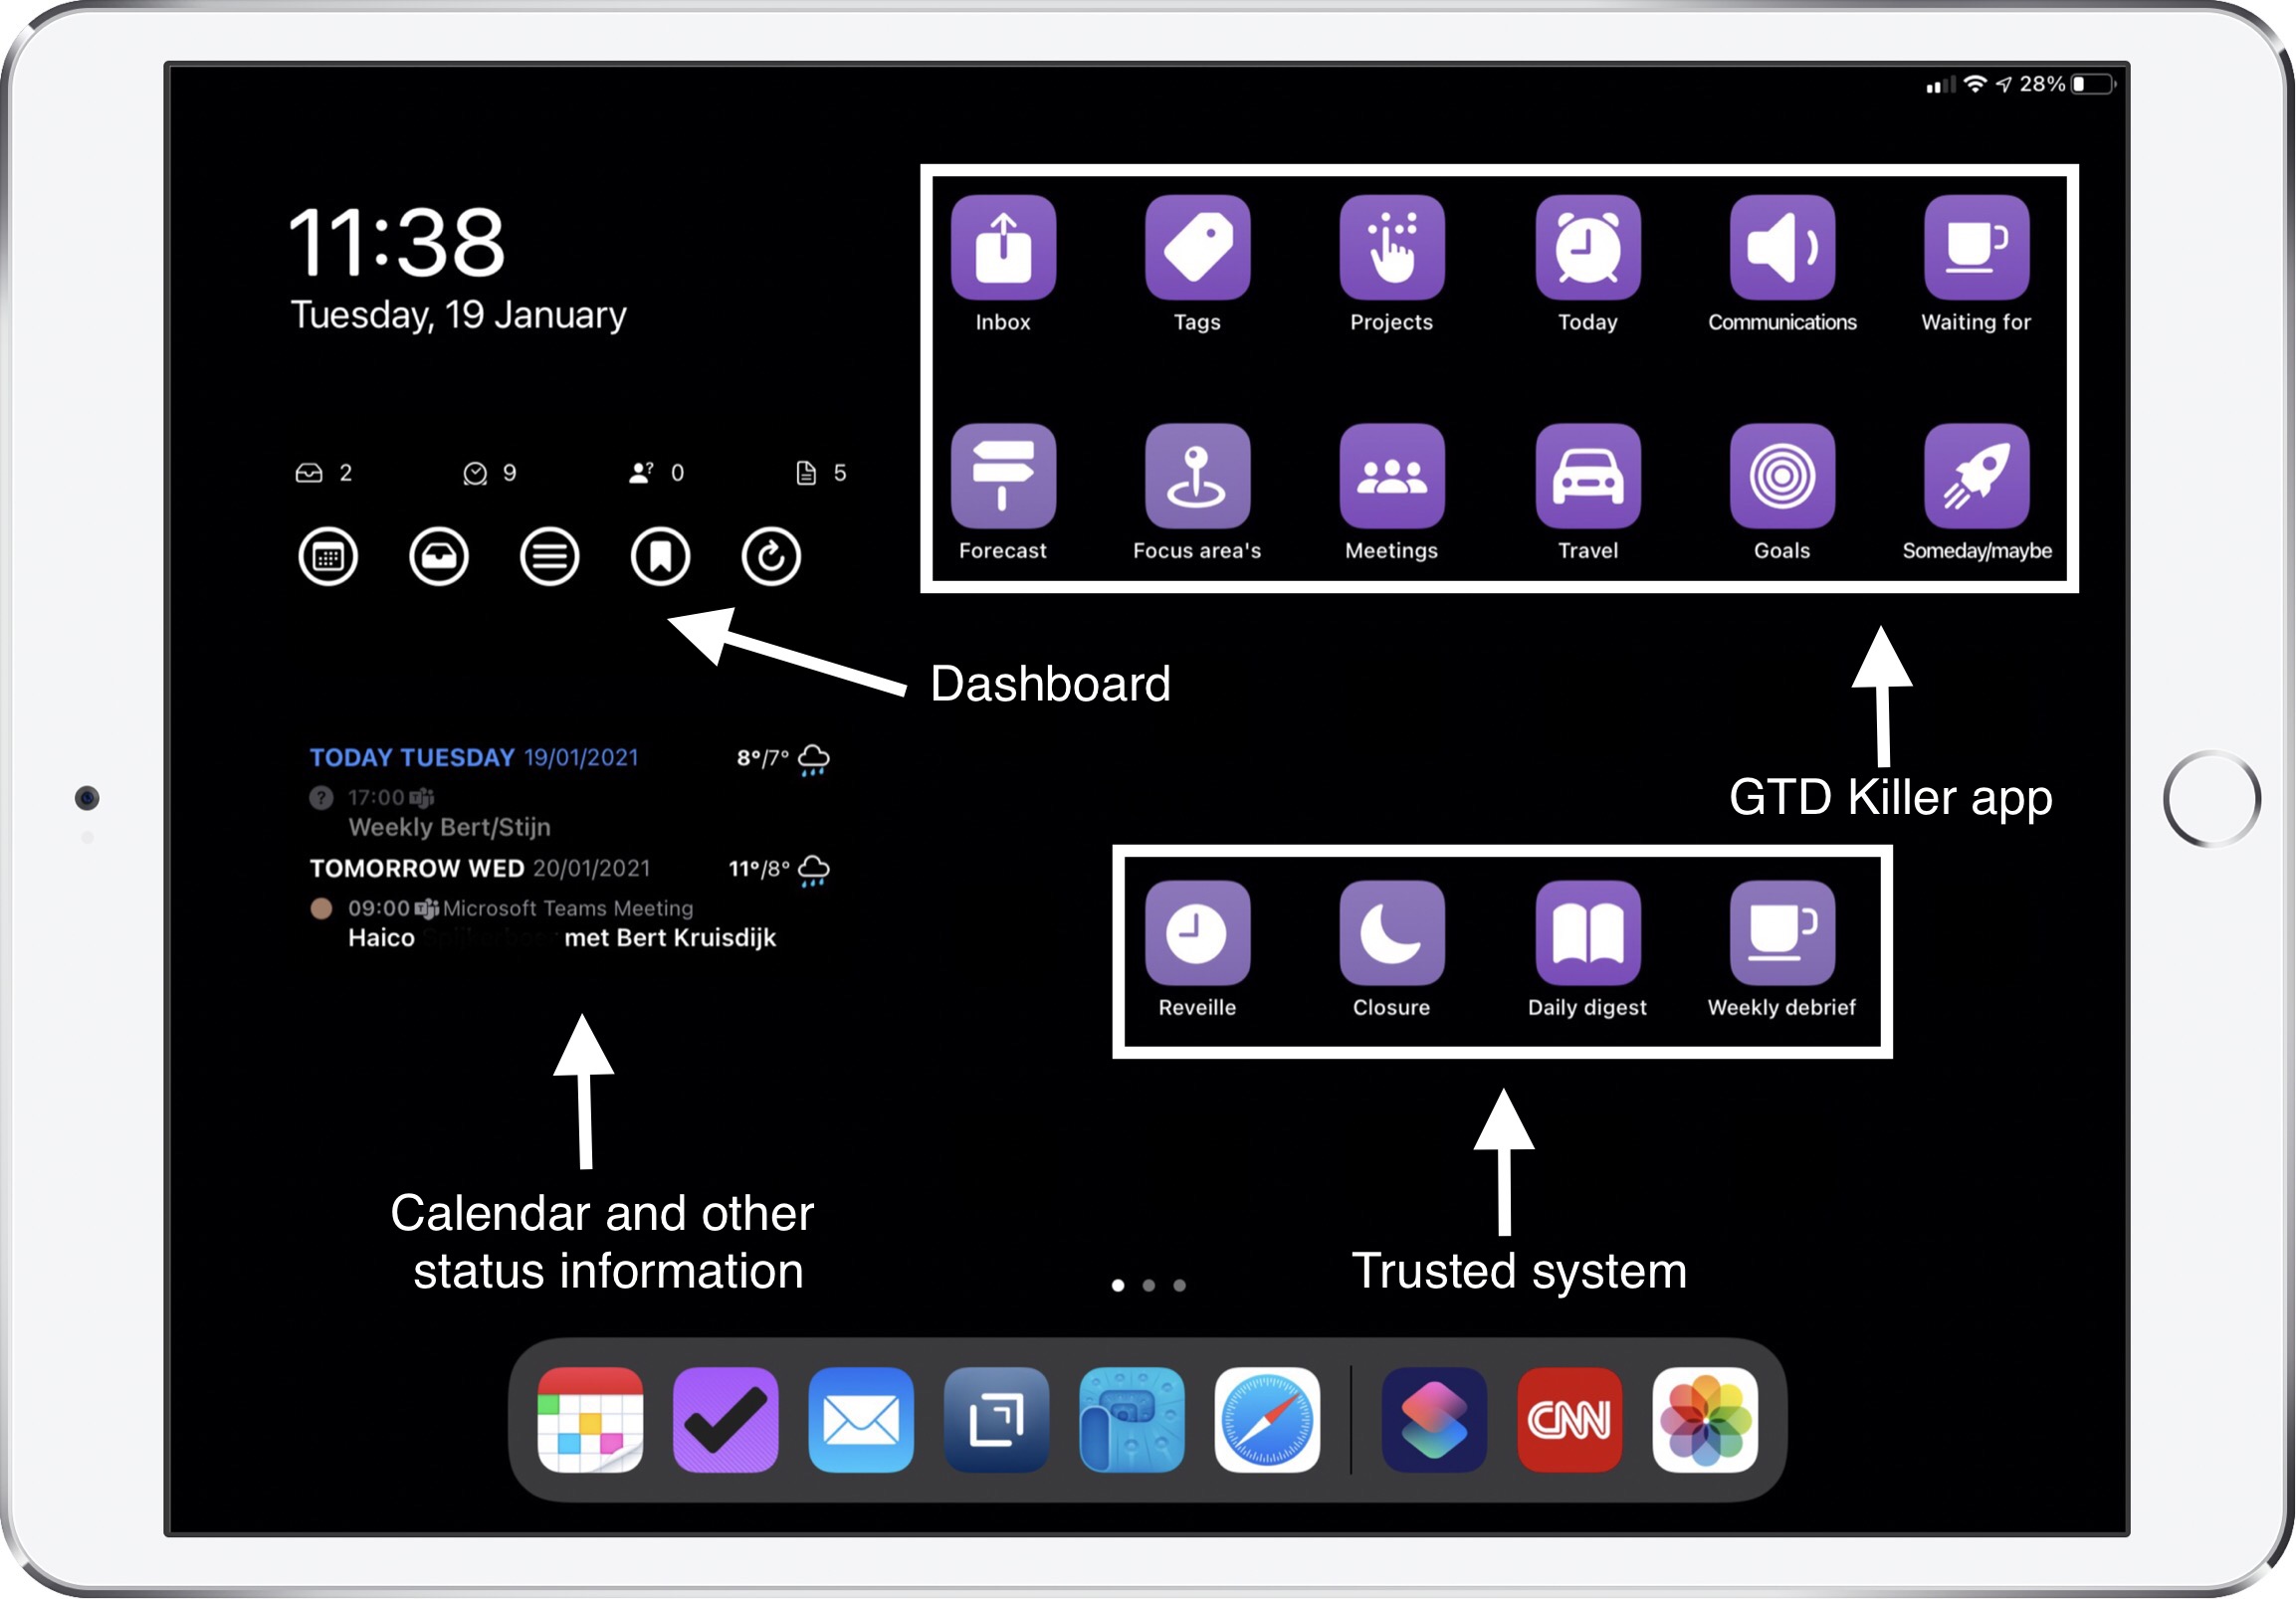 iPad Home Screen with dashboard, GTD killer app, calendar commitments and trusted system